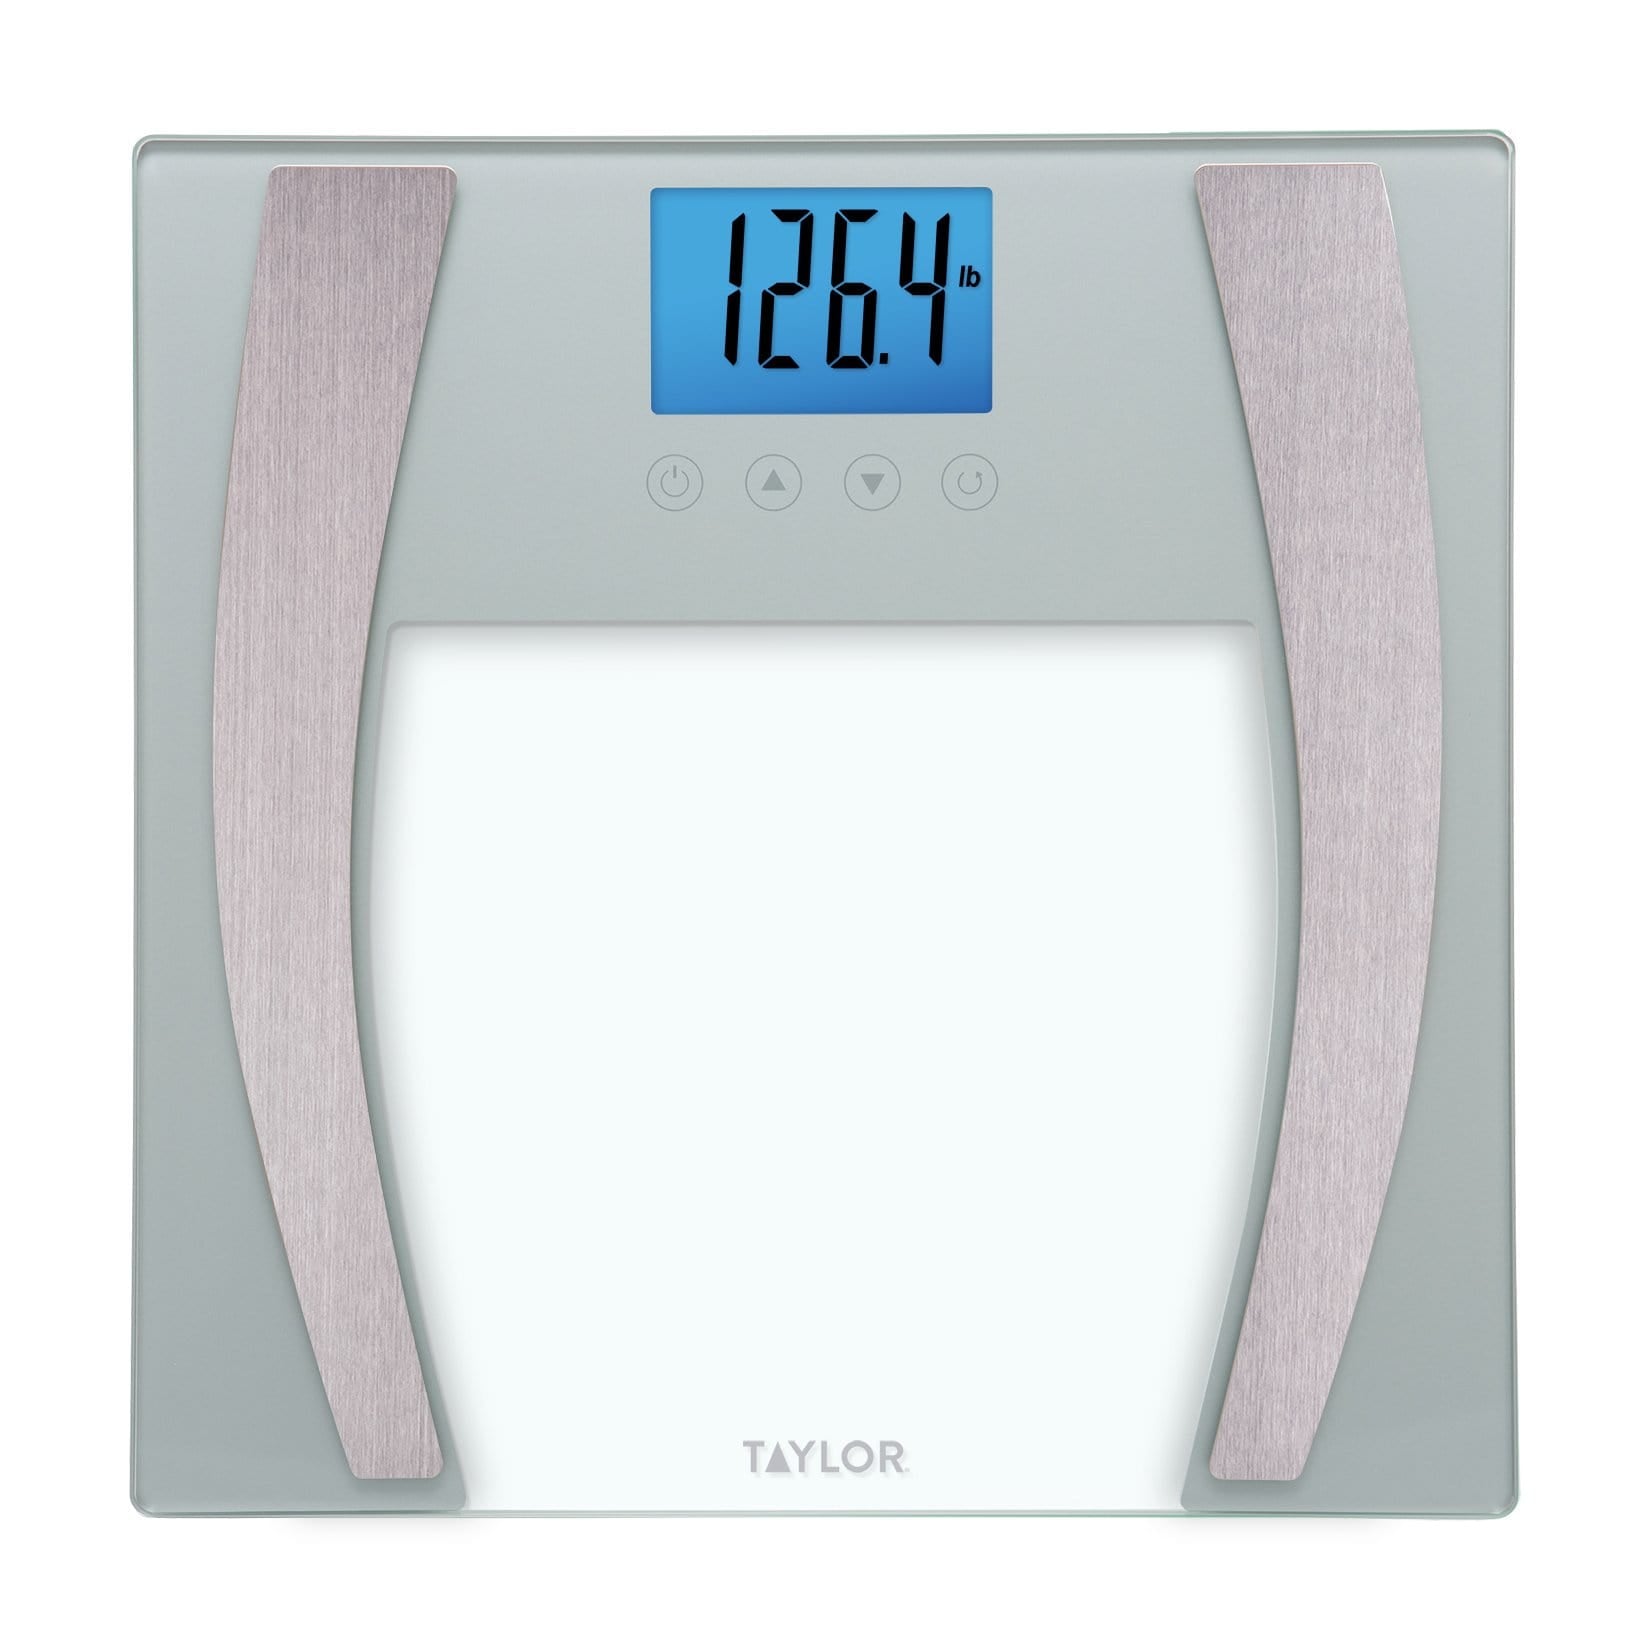 Taylor Precision Products - Taylor Model 5731F Body Fat Scale